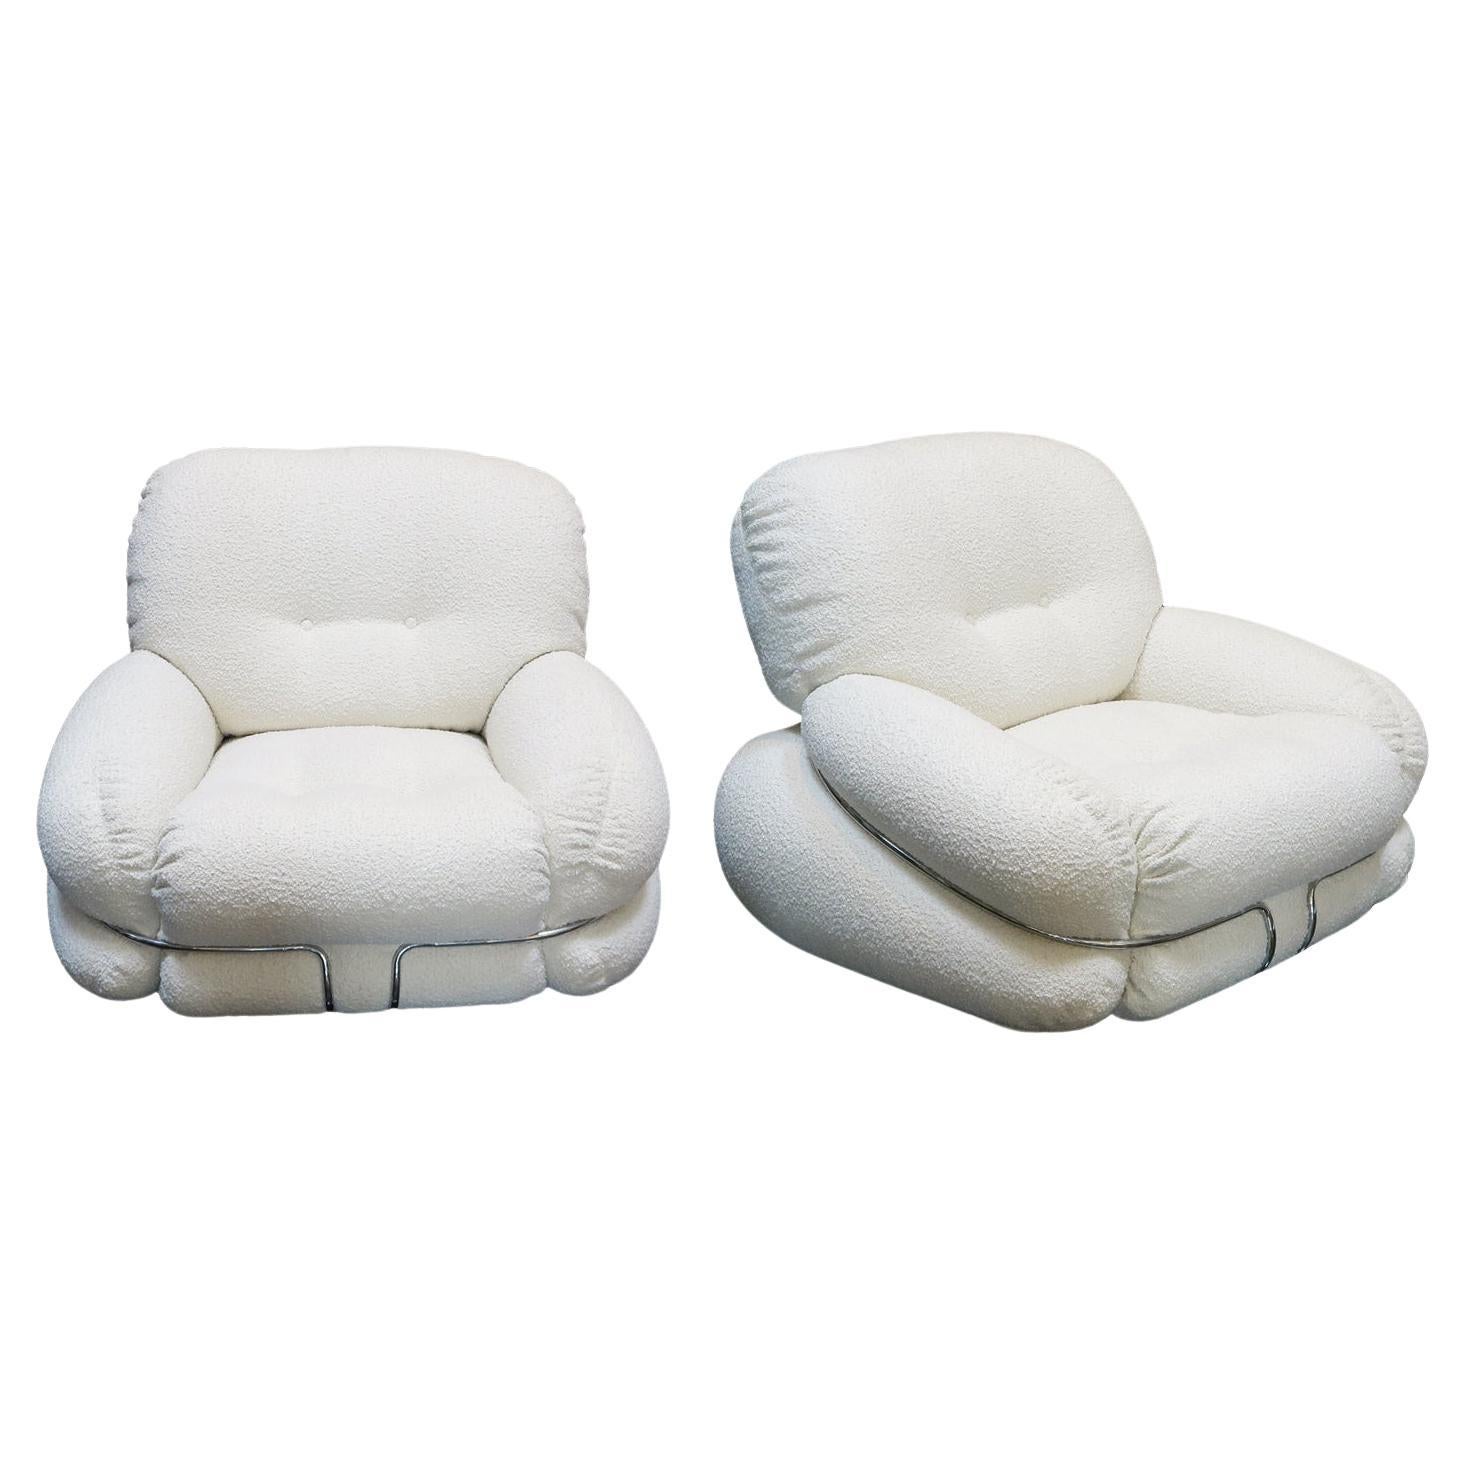 Pair of Italian lounge Chairs in White Bouclé fabric Attr. Adriano Piazzesi 